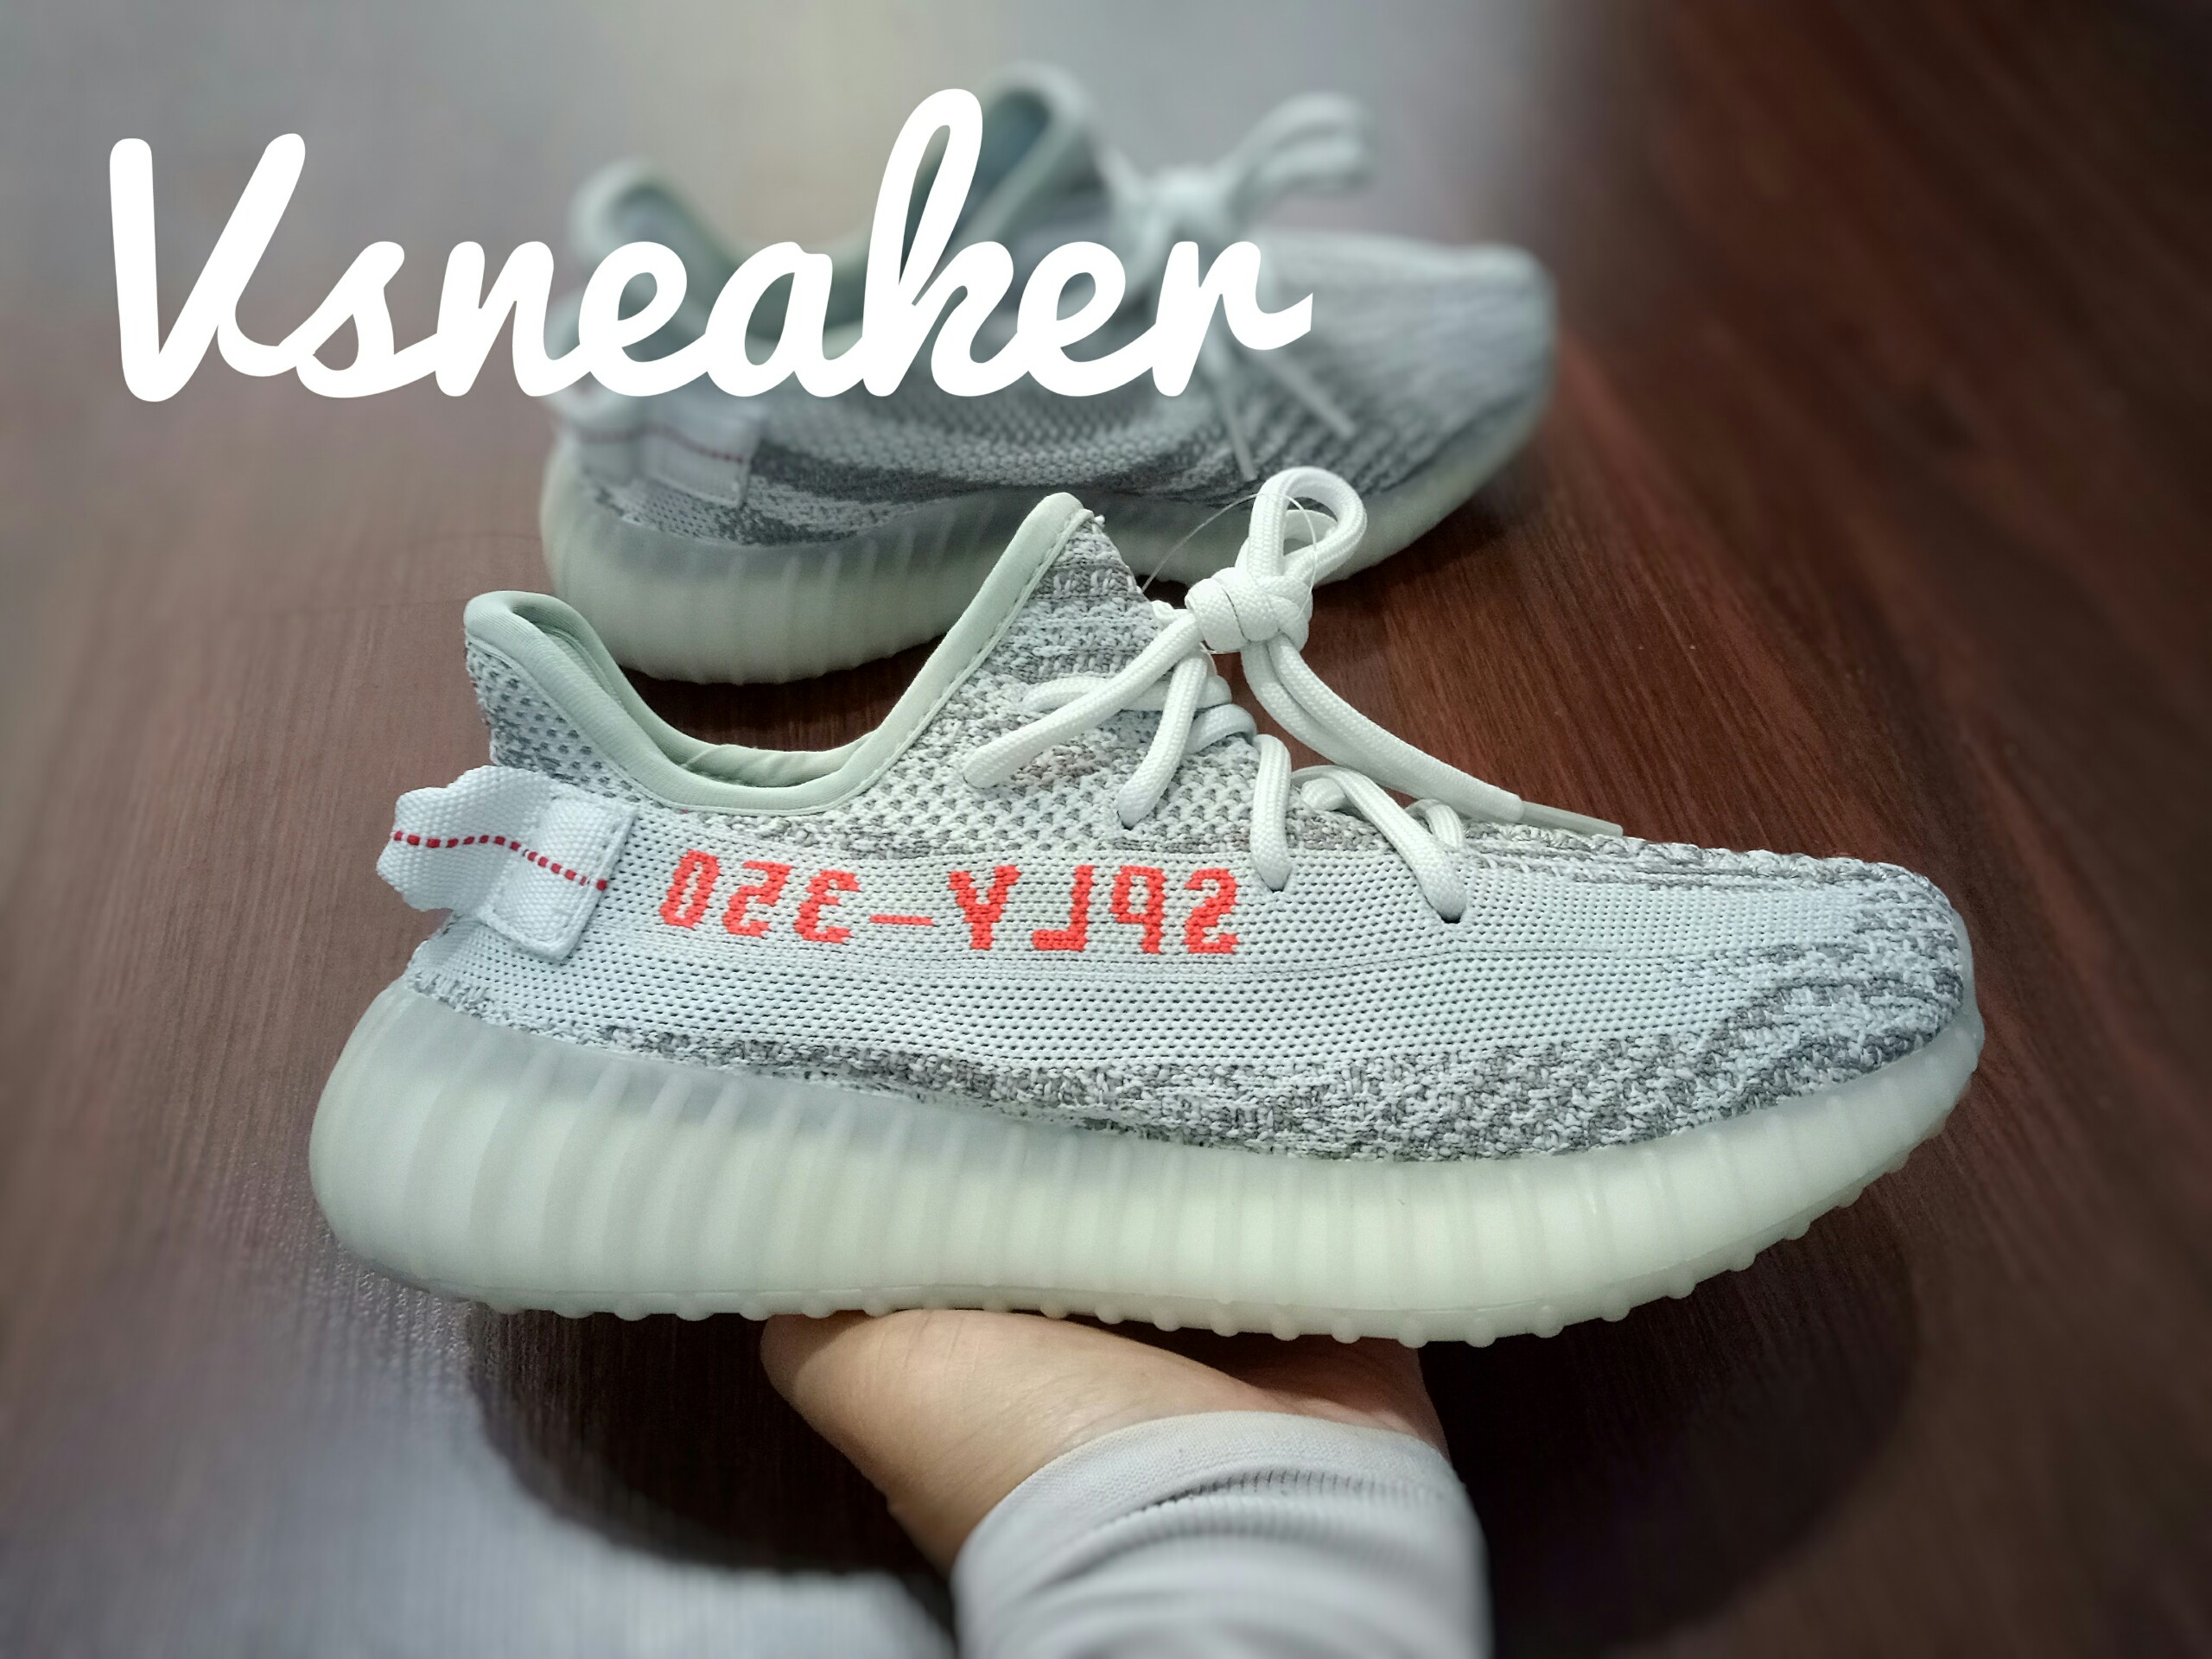 yeezy 350 blue tint real